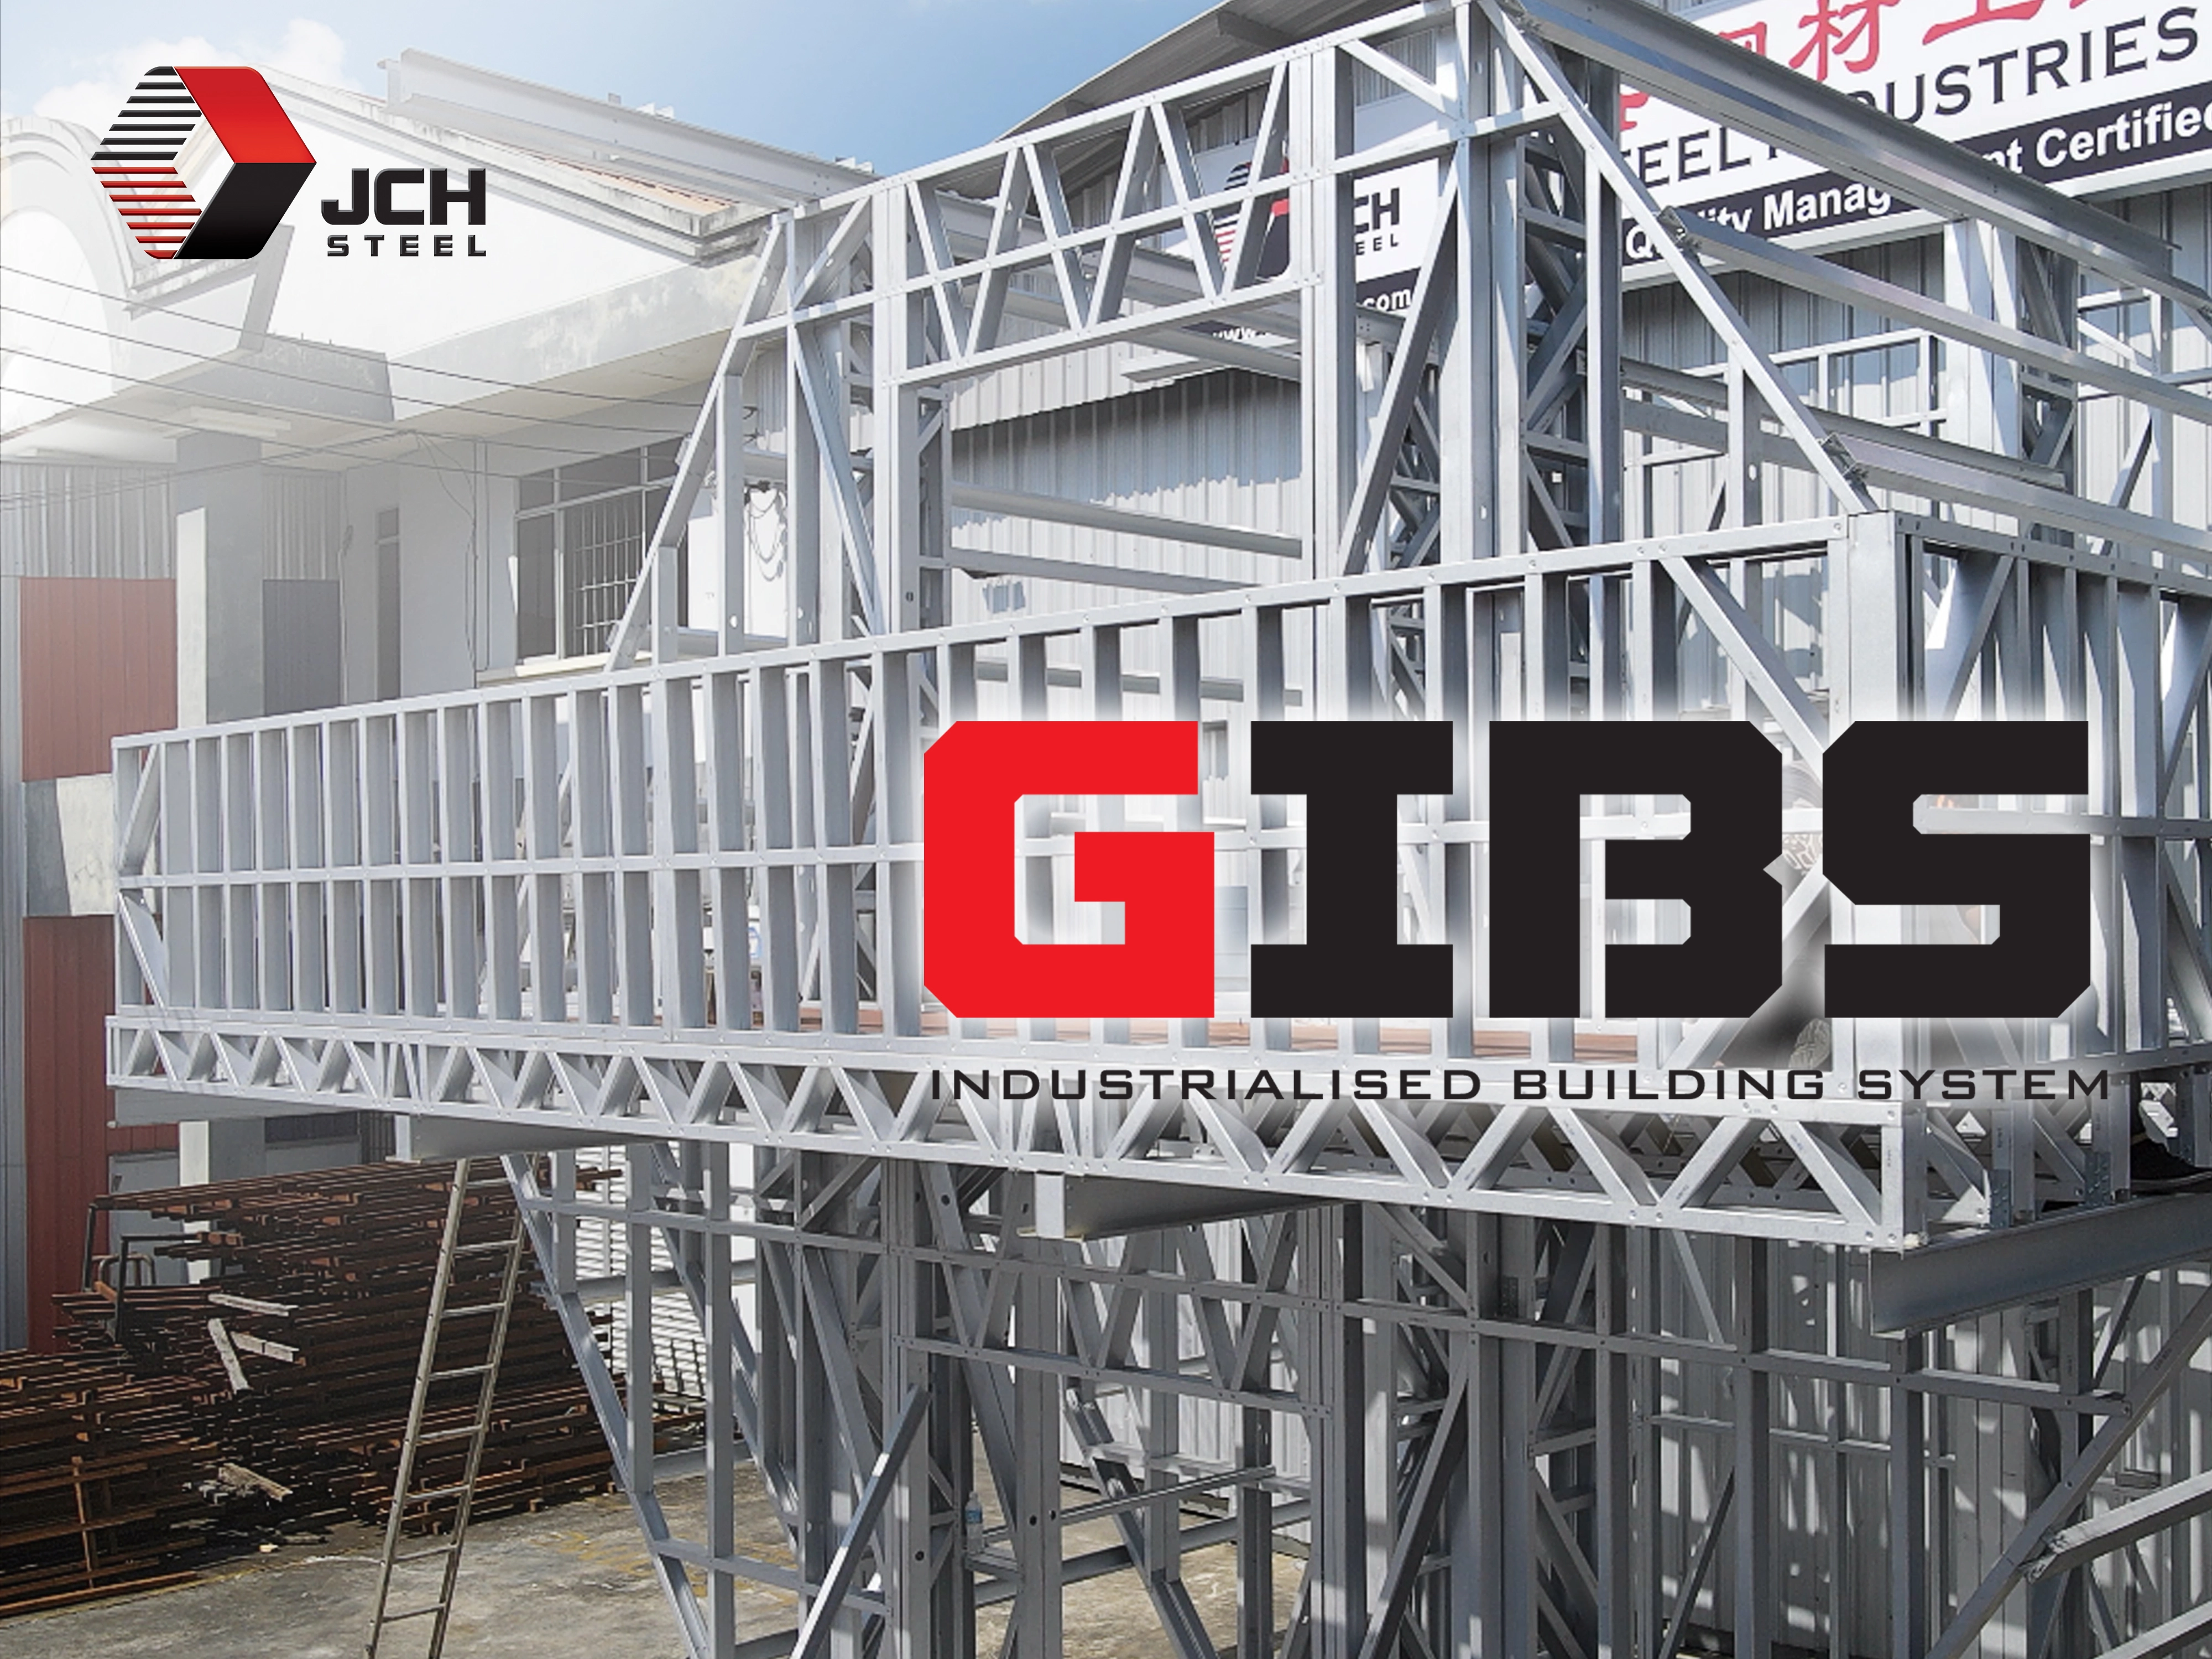 GIBS Industrialised Building System